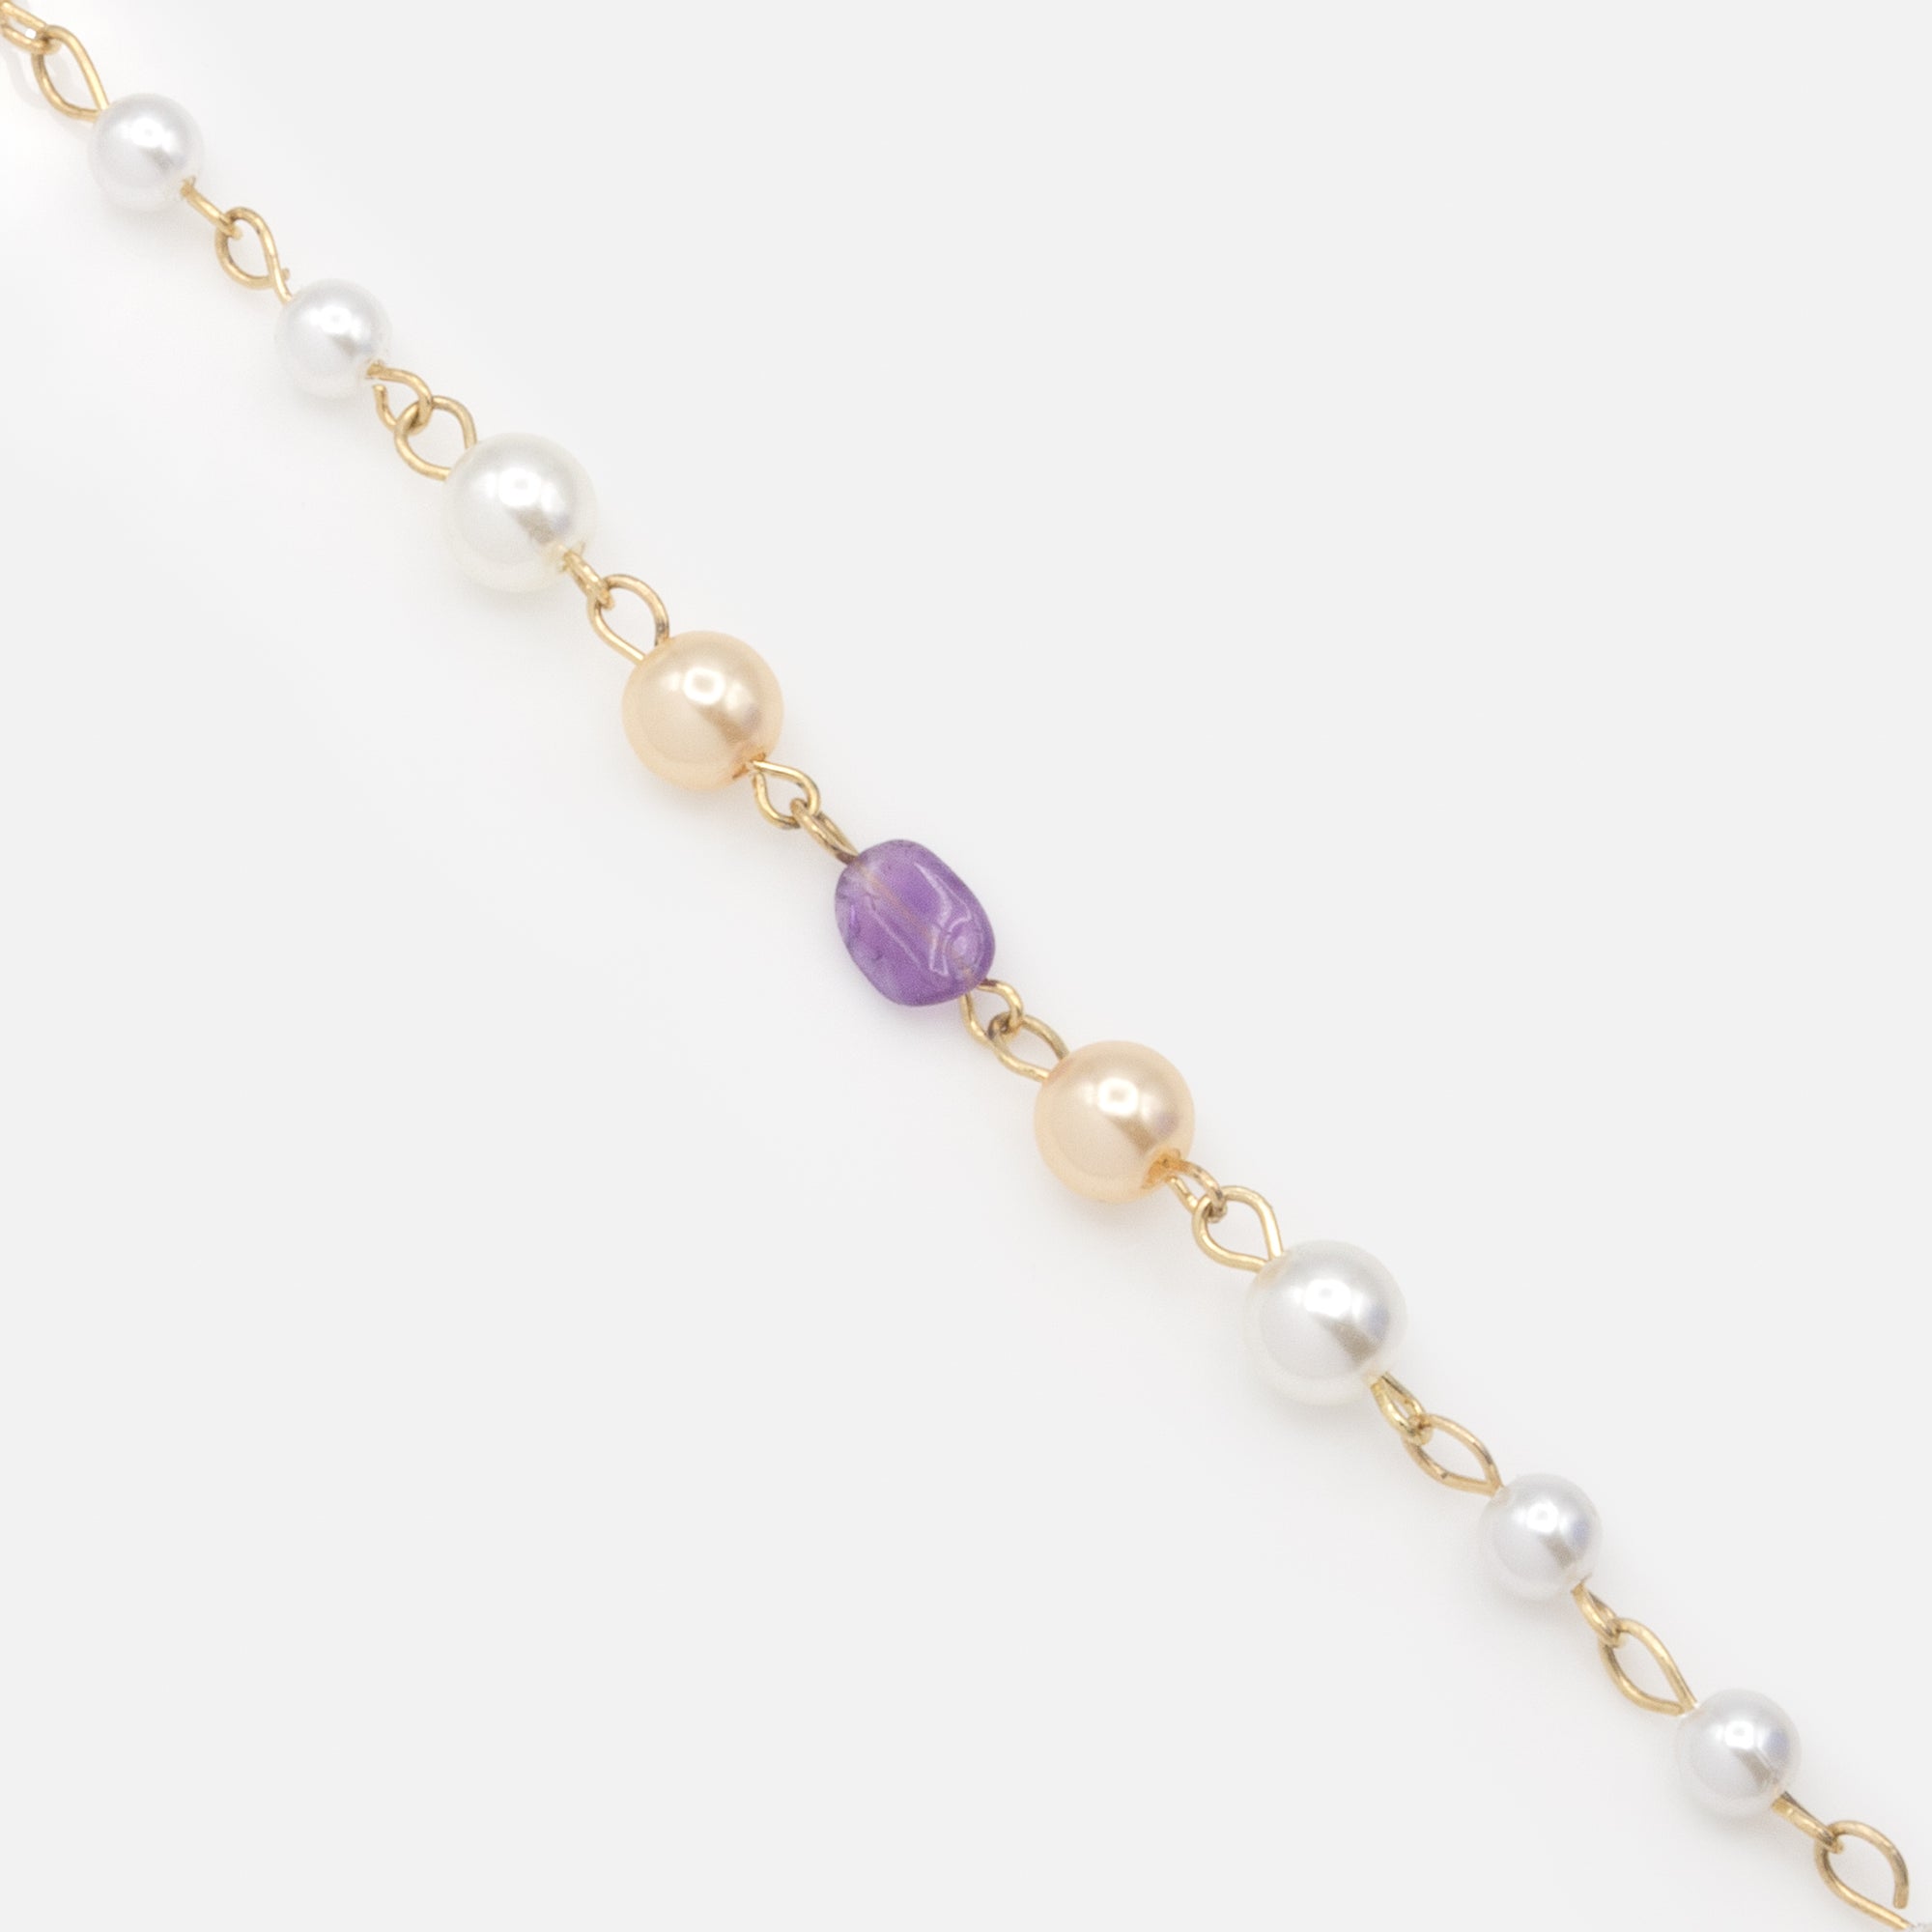 Gold bracelet with two-tone beads and purple stone